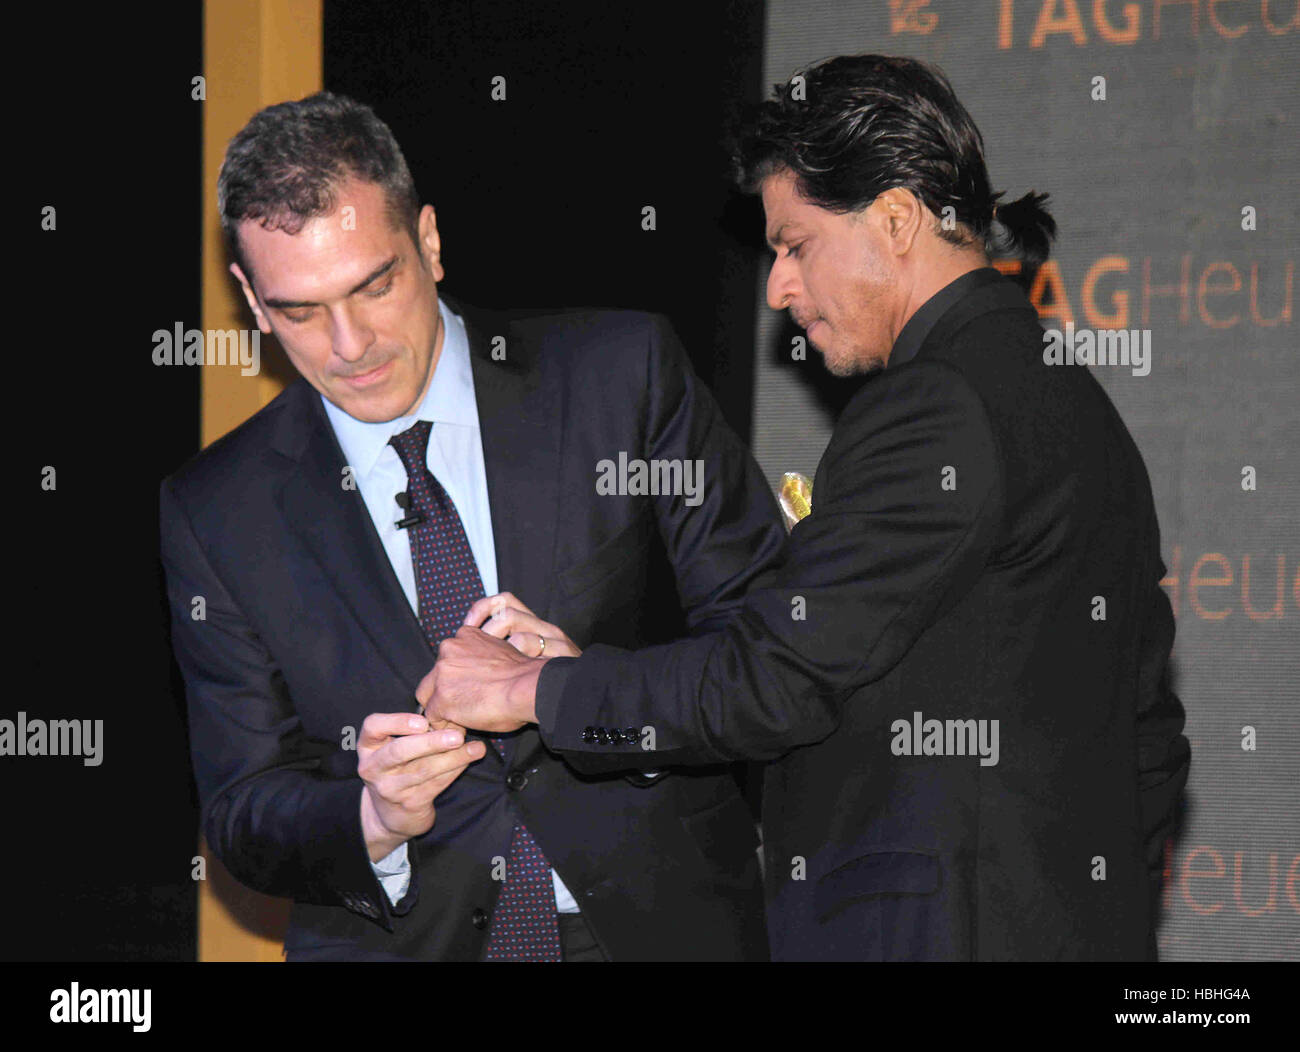 Bollywood actor Shah Rukh Khan receiving watch from Franck Dardenne General Manager Tag Heuer at event of Tag Heuer Golden Carrera collection Bombay Mumbai Maharashtra India Asia Stock Photo